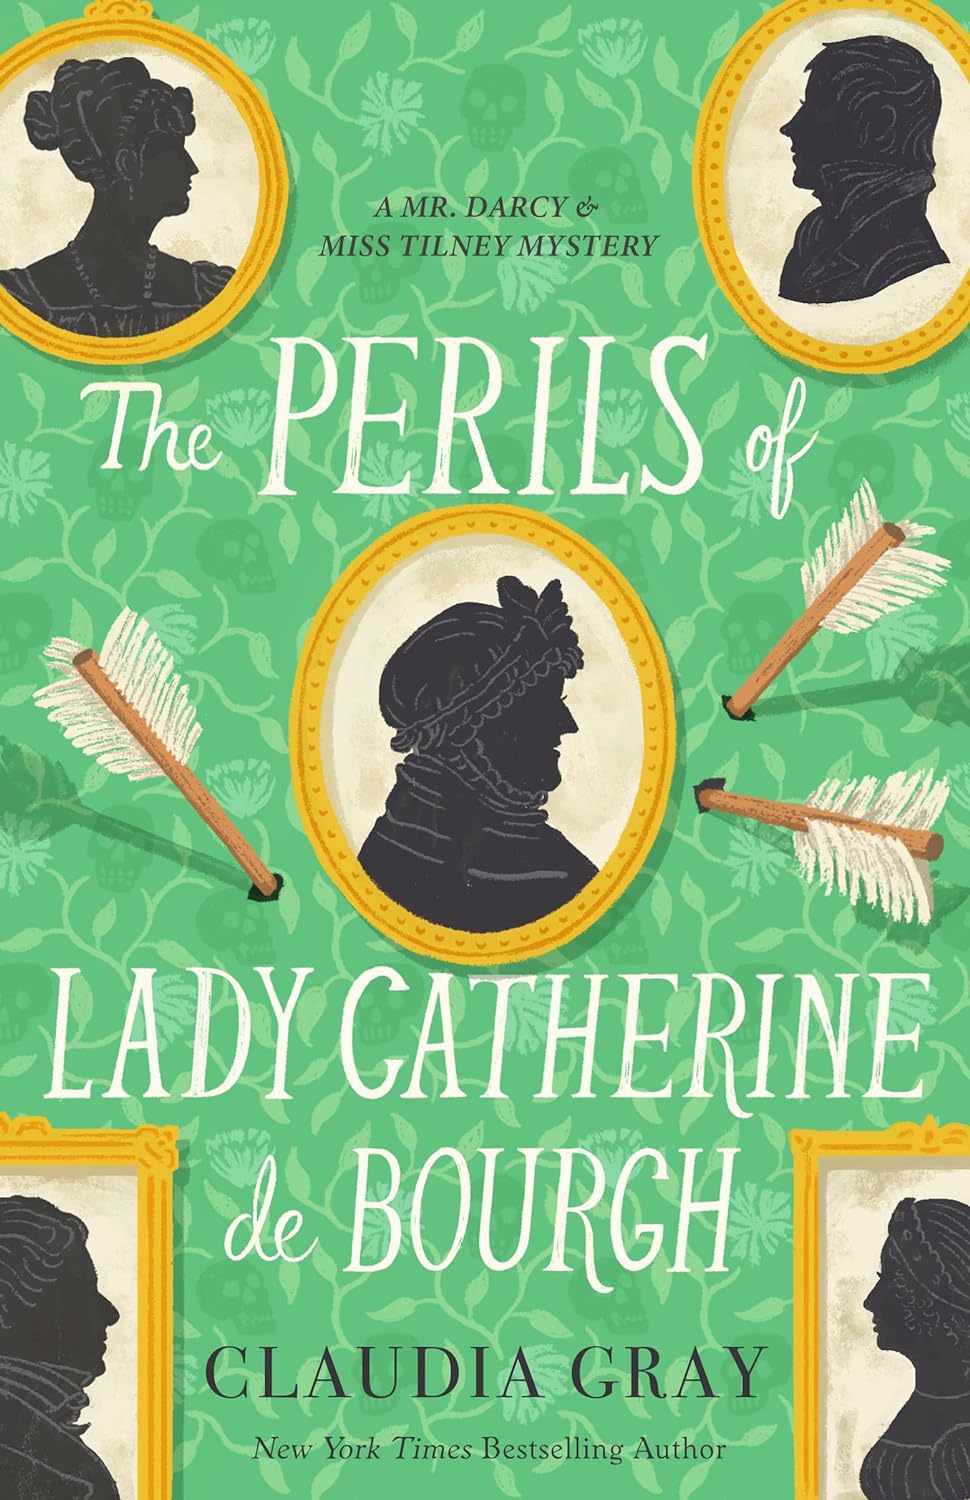 The Perils of Lady Catherine de Bourgh, by Claudia Gray